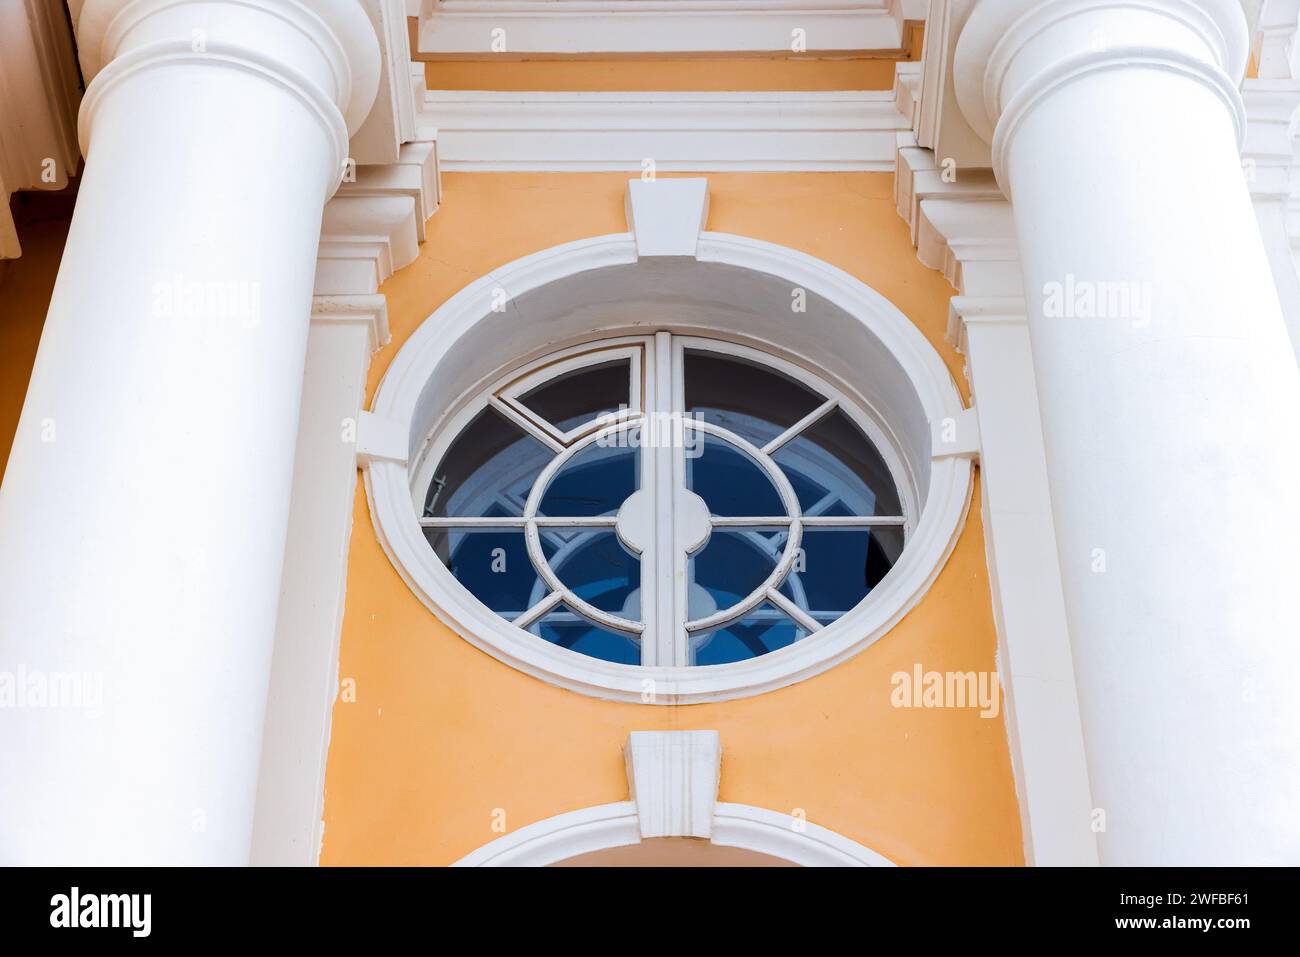 Classic architecture details, round window with white frame in yellow stone wall Stock Photo